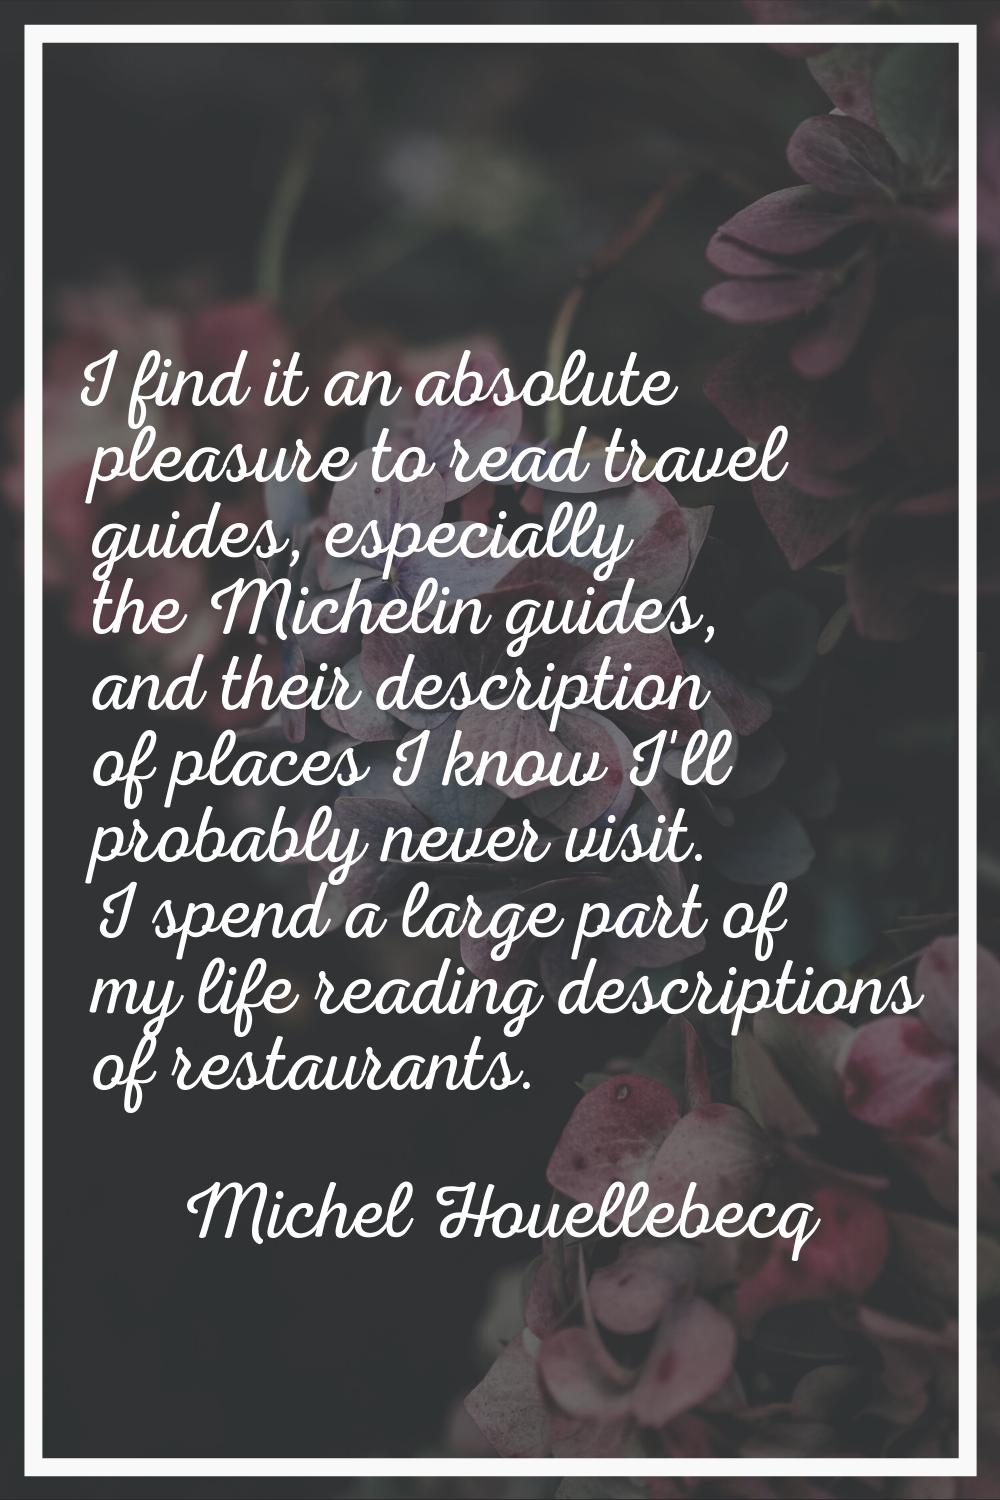 I find it an absolute pleasure to read travel guides, especially the Michelin guides, and their des